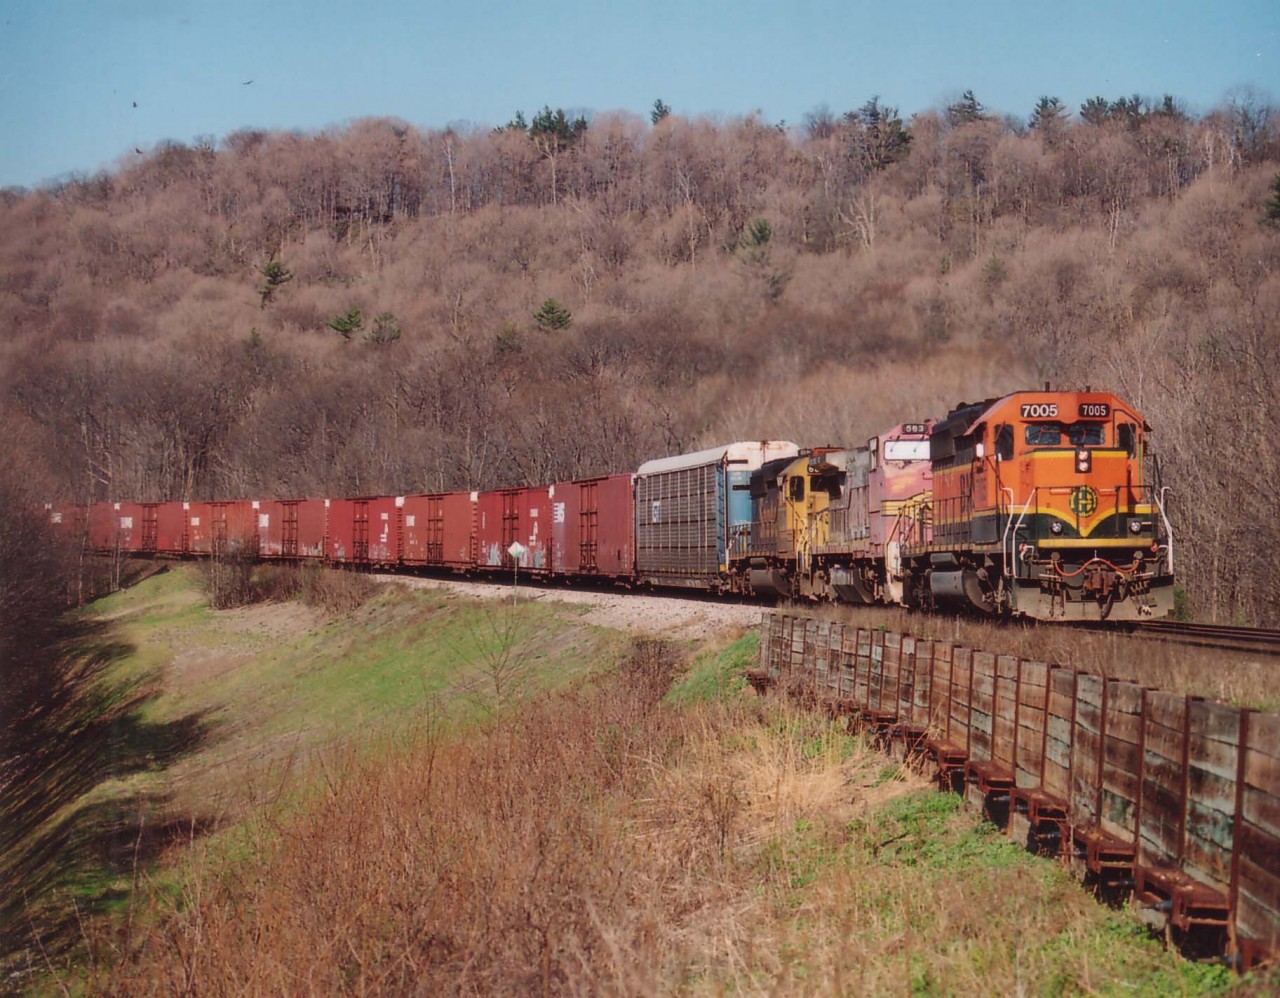 From the days of "CN Colour" comes an all BNSF family leading CN#394 on approach to Mile 2 Dundas Sub. Power is BNSF 7005, 563 and 6871.